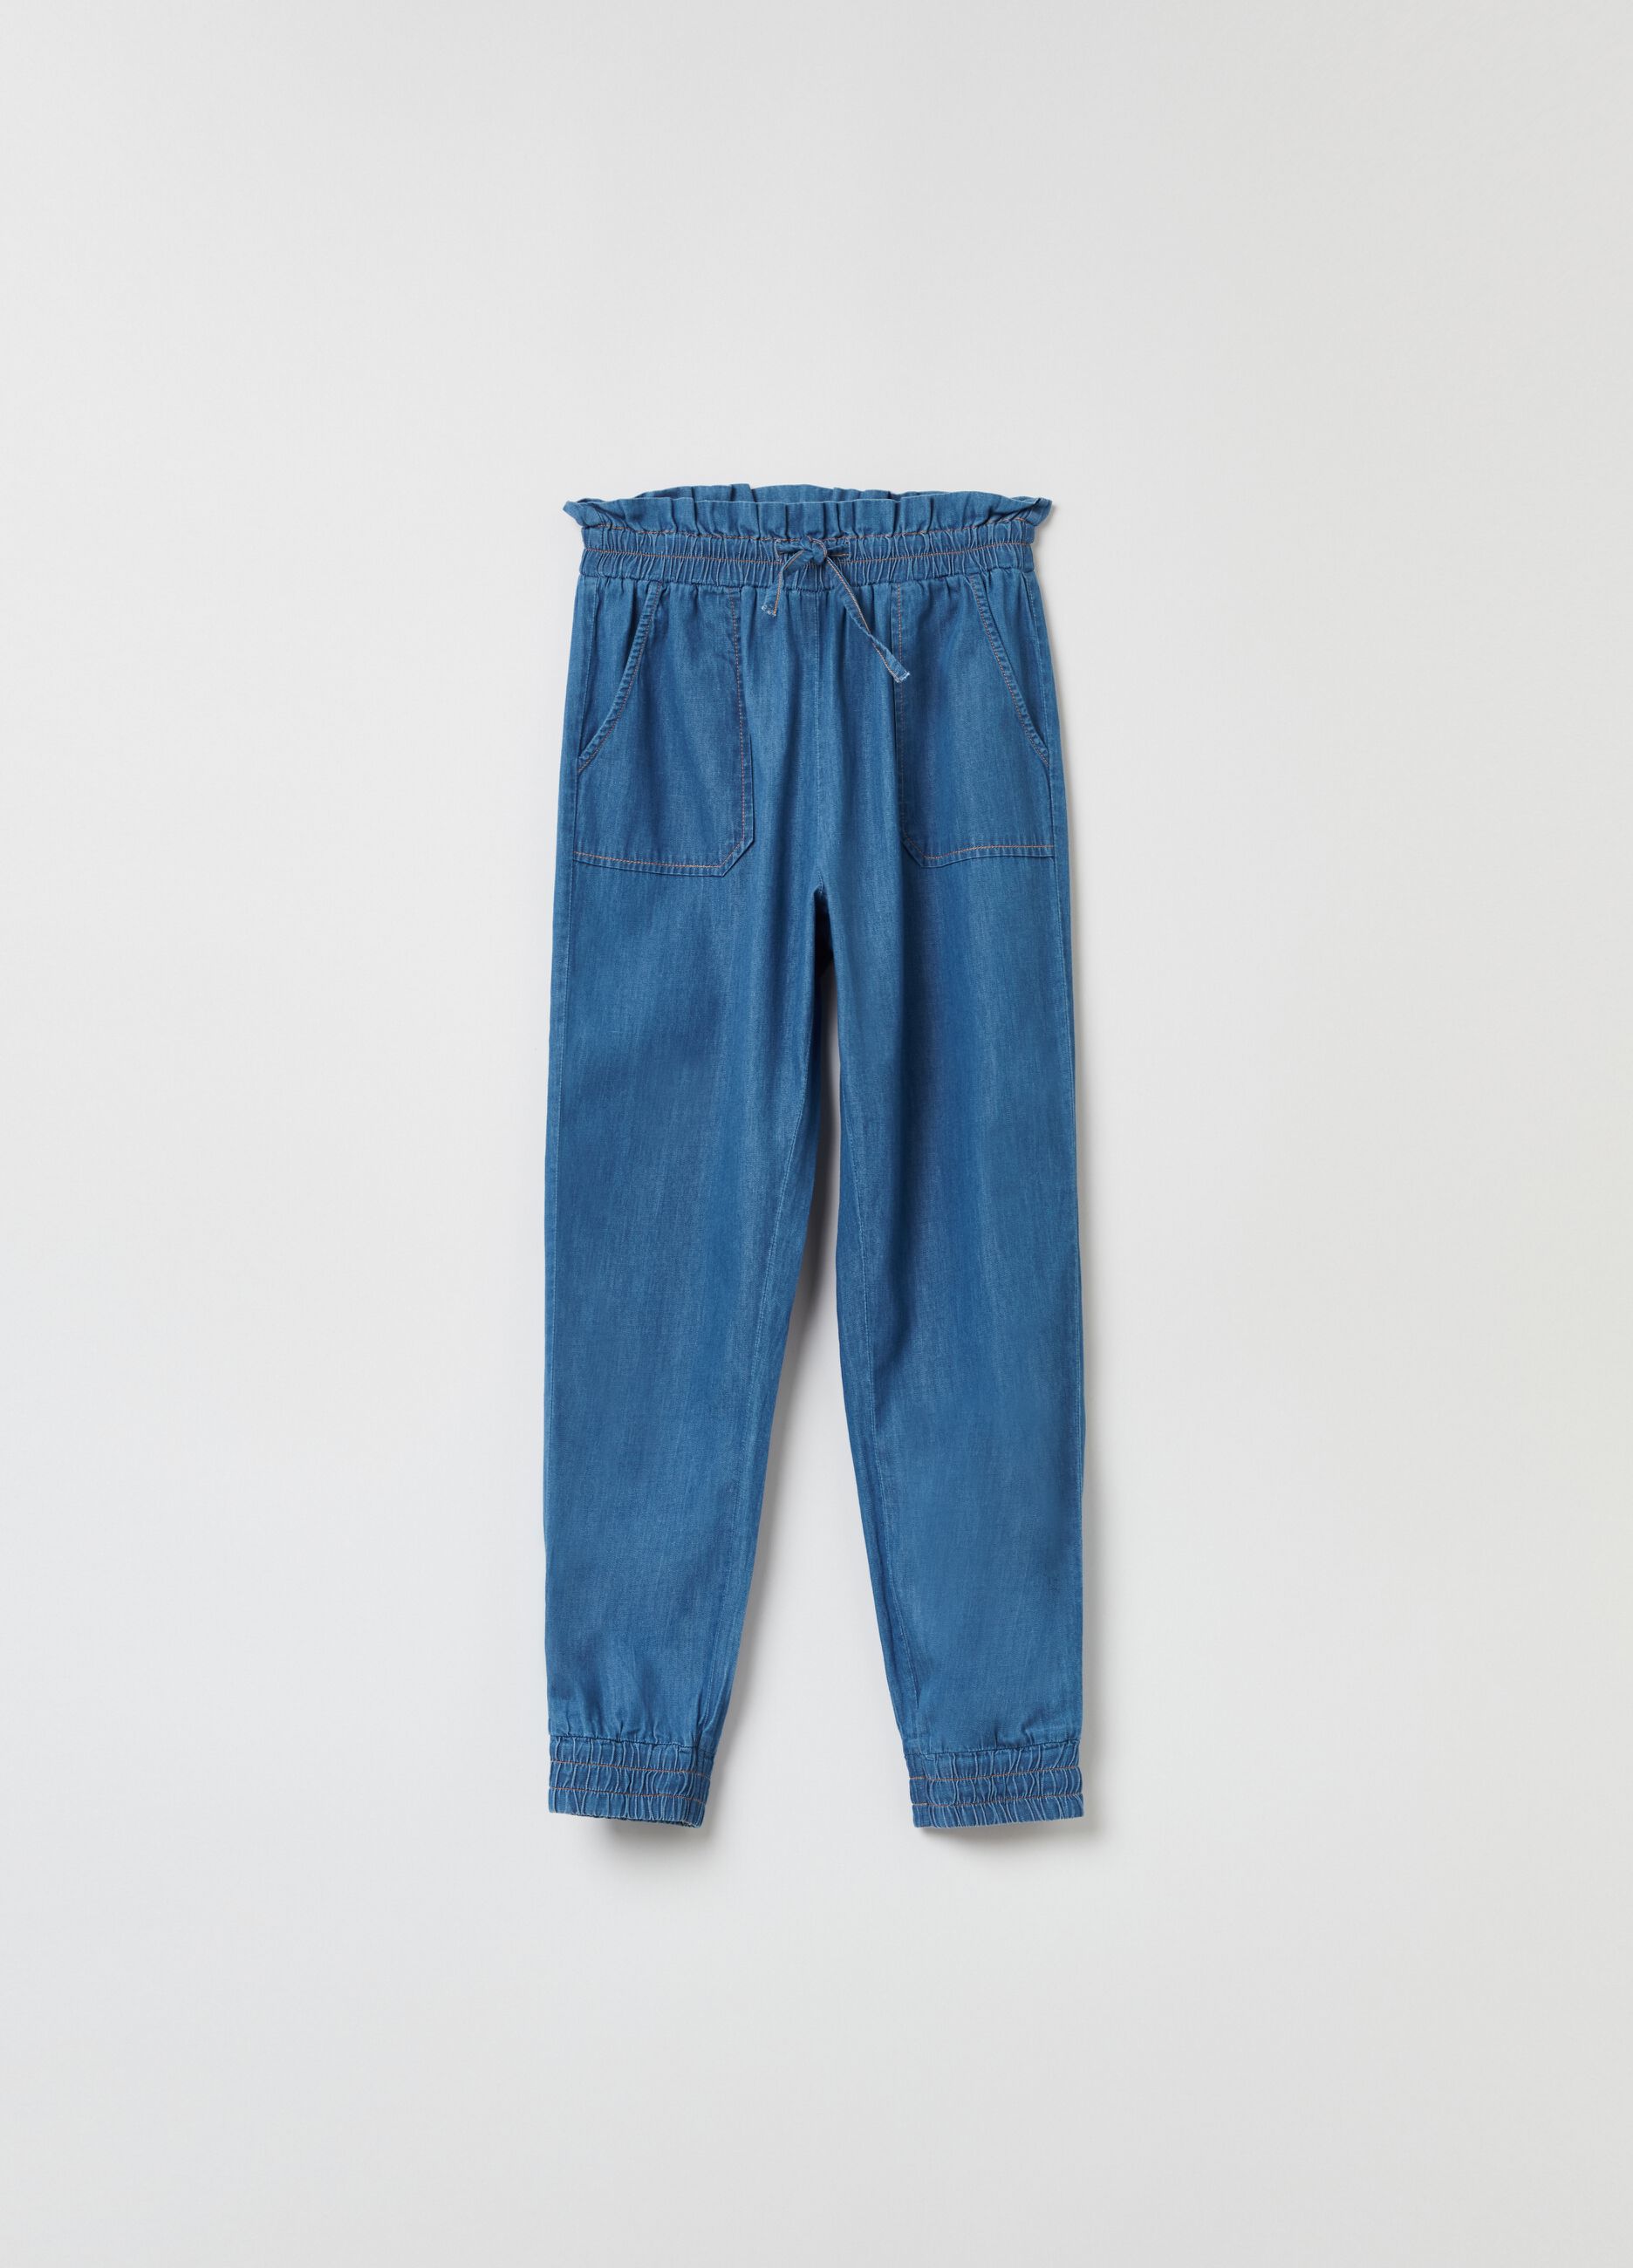 Denim-effect joggers with pockets